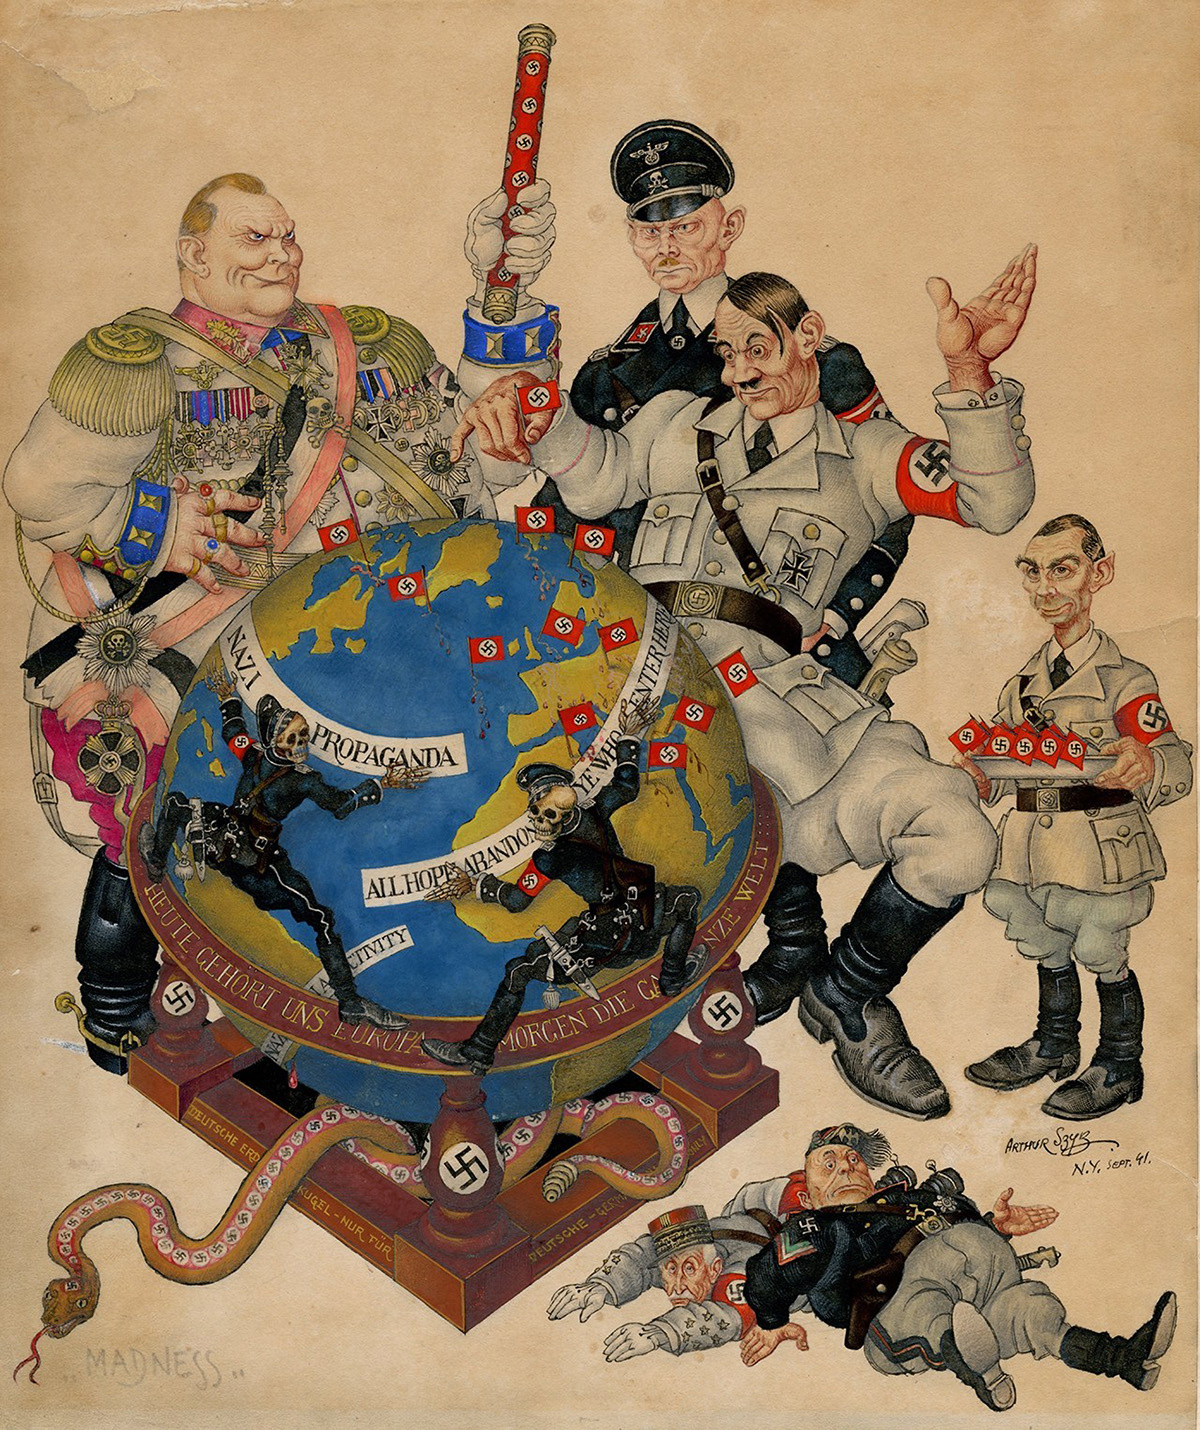 Madness,” New York, 1941 (ARTHUR SZYK/COURTESY THE MAGNES COLLECTION)